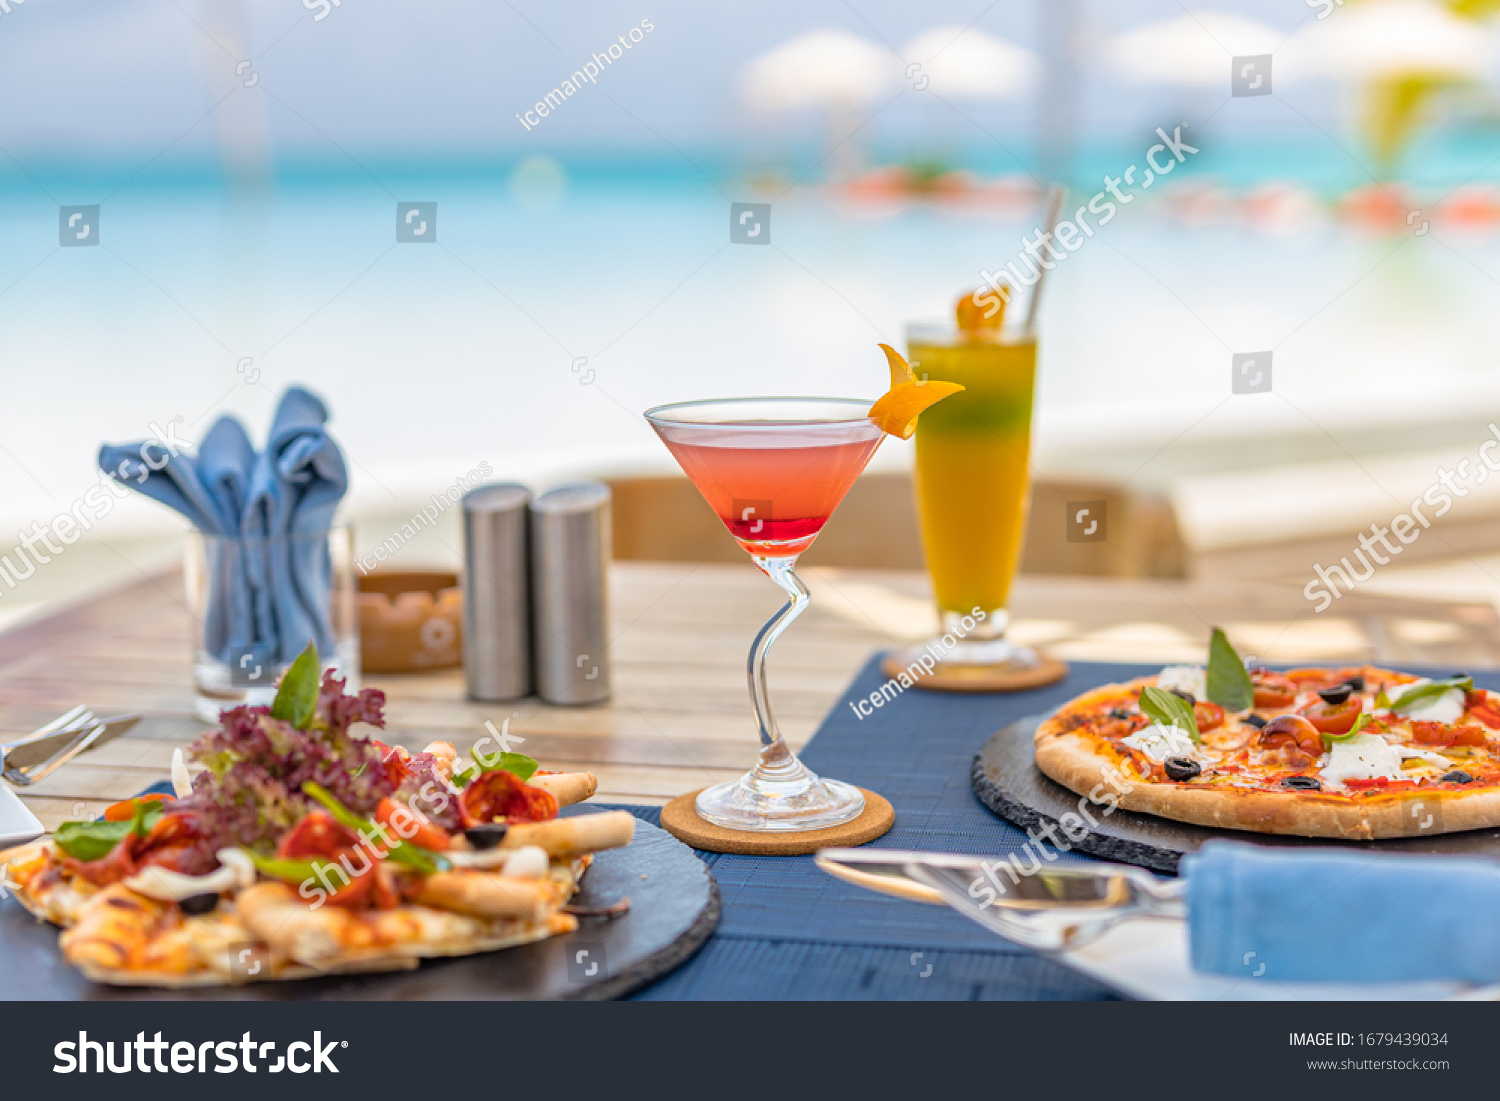 Pizza and tropical cocktail with beautiful sunny vacation infinity swimming pool ocean view. Beach restaurant, sea view, glasses, plates, food, tropical cocktail, blur loungers, chairs, sun umbrellas #1679439034